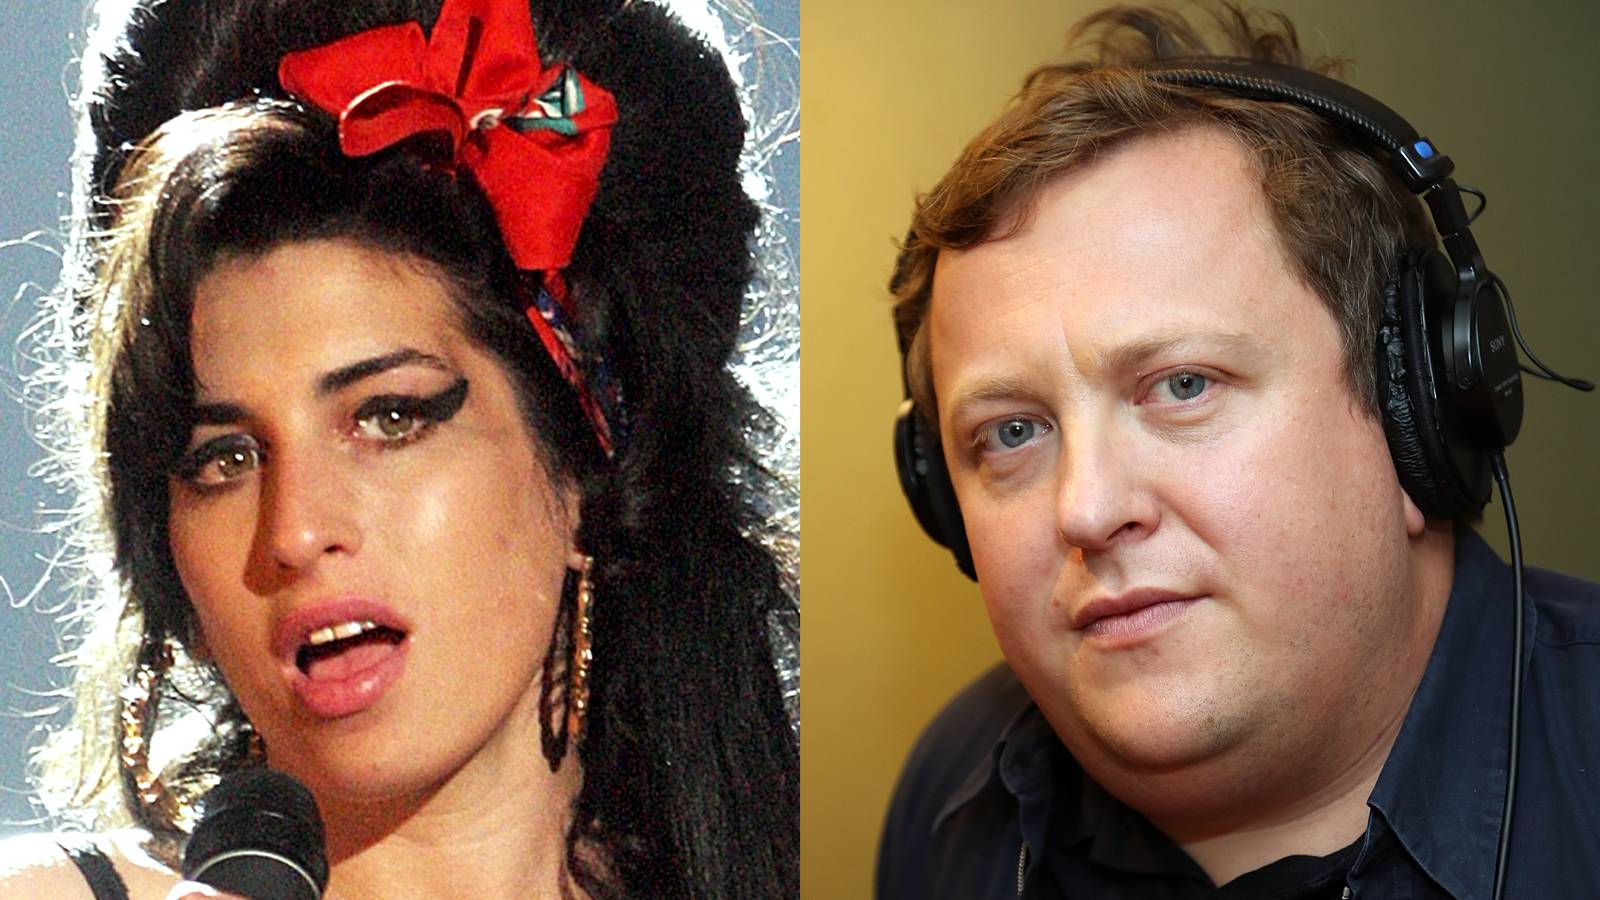 Back to Black: A-behind-the-scenes documentary on the legendary record by  Amy Winehouse